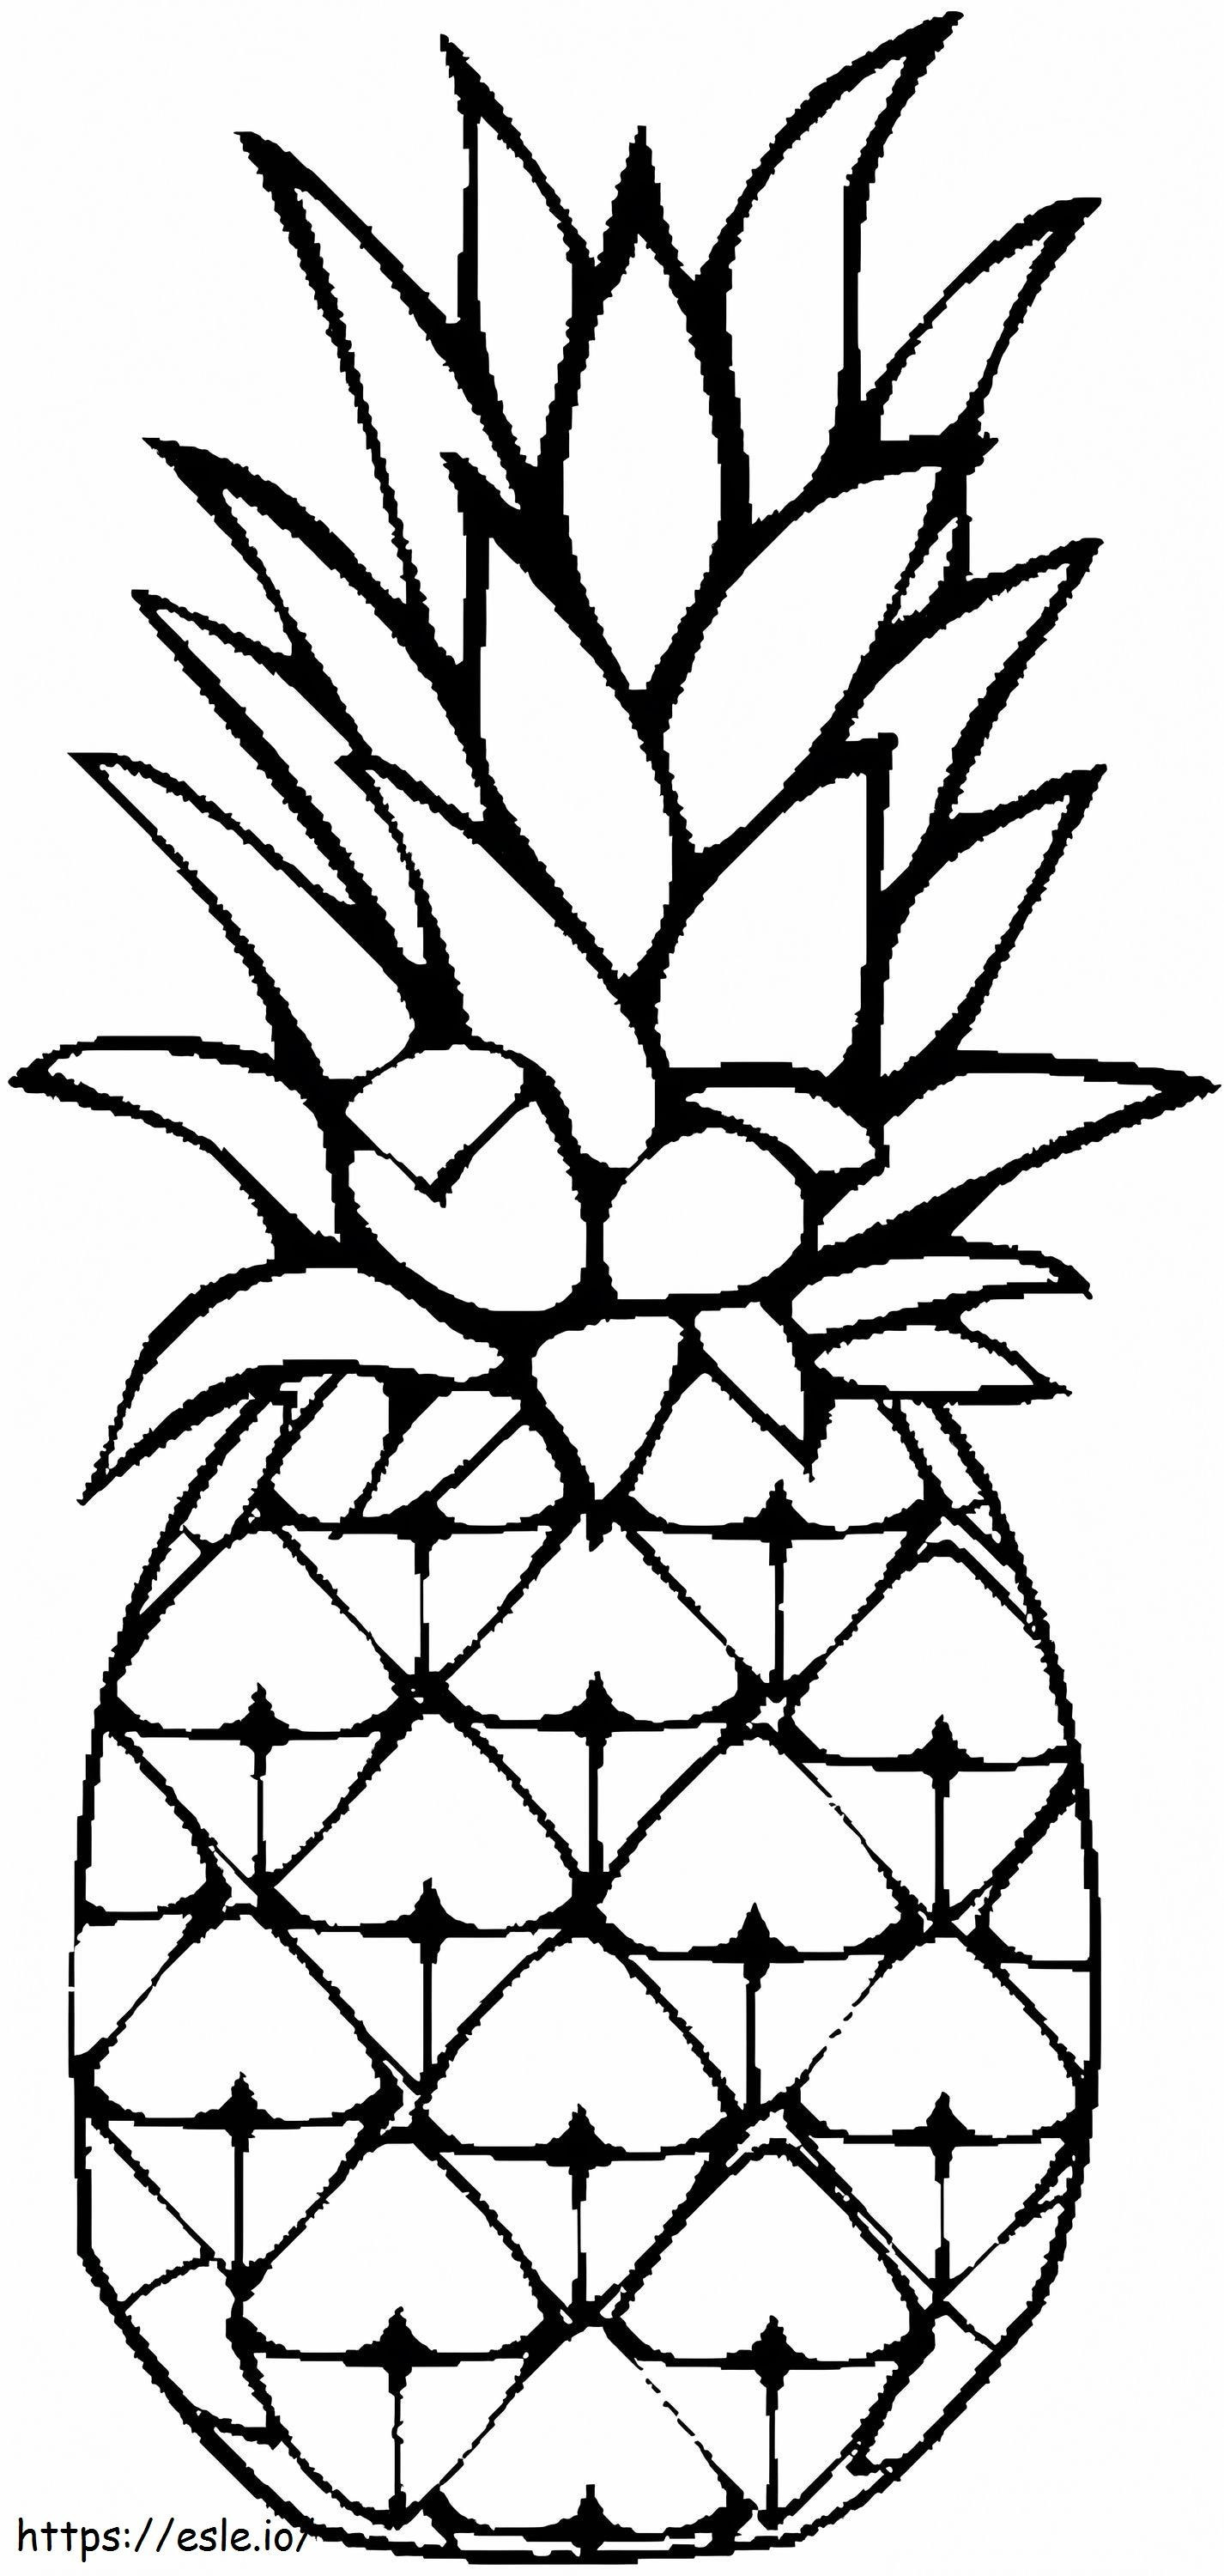 Awesome Pineapple coloring page